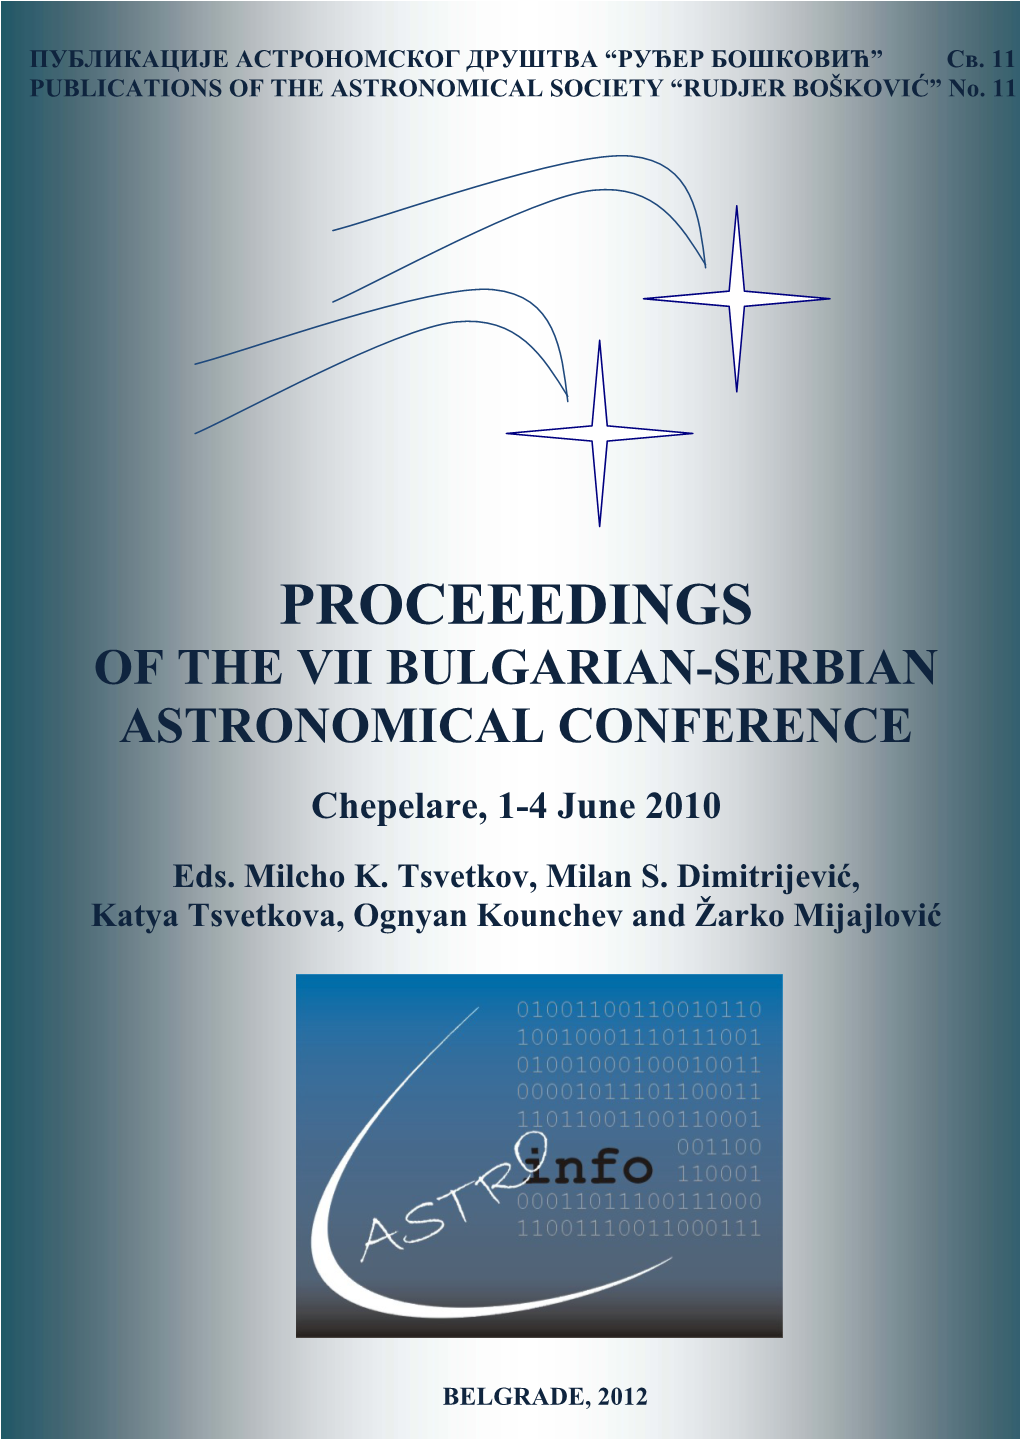 Proceeedings of the Vii Bulgarian-Serbian Astronomical Conference